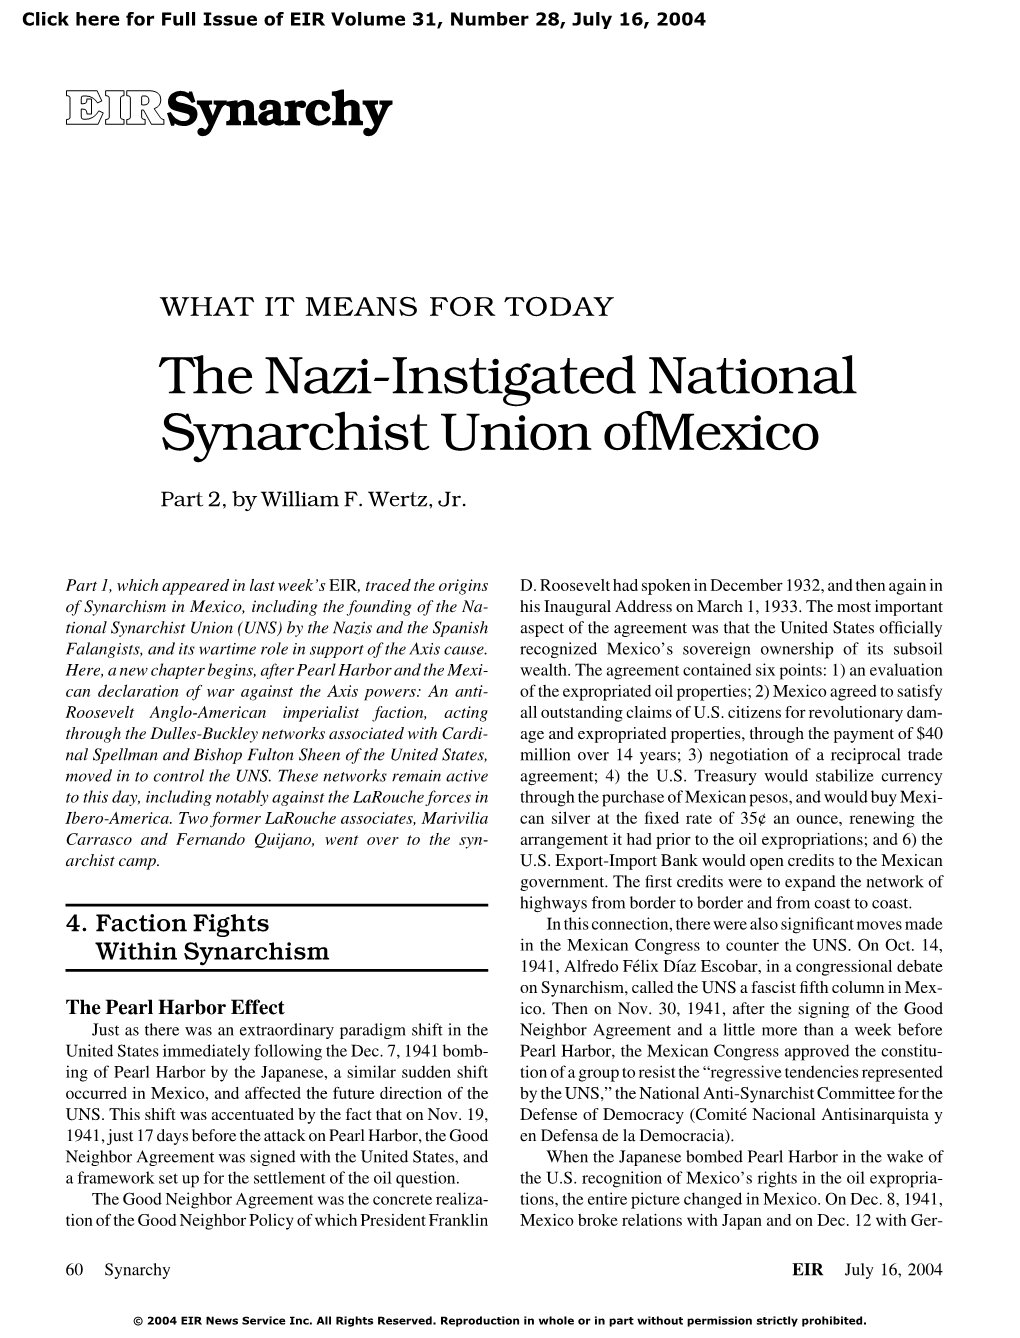 The Nazi-Instigated National Synarchist Union of Mexico: What It